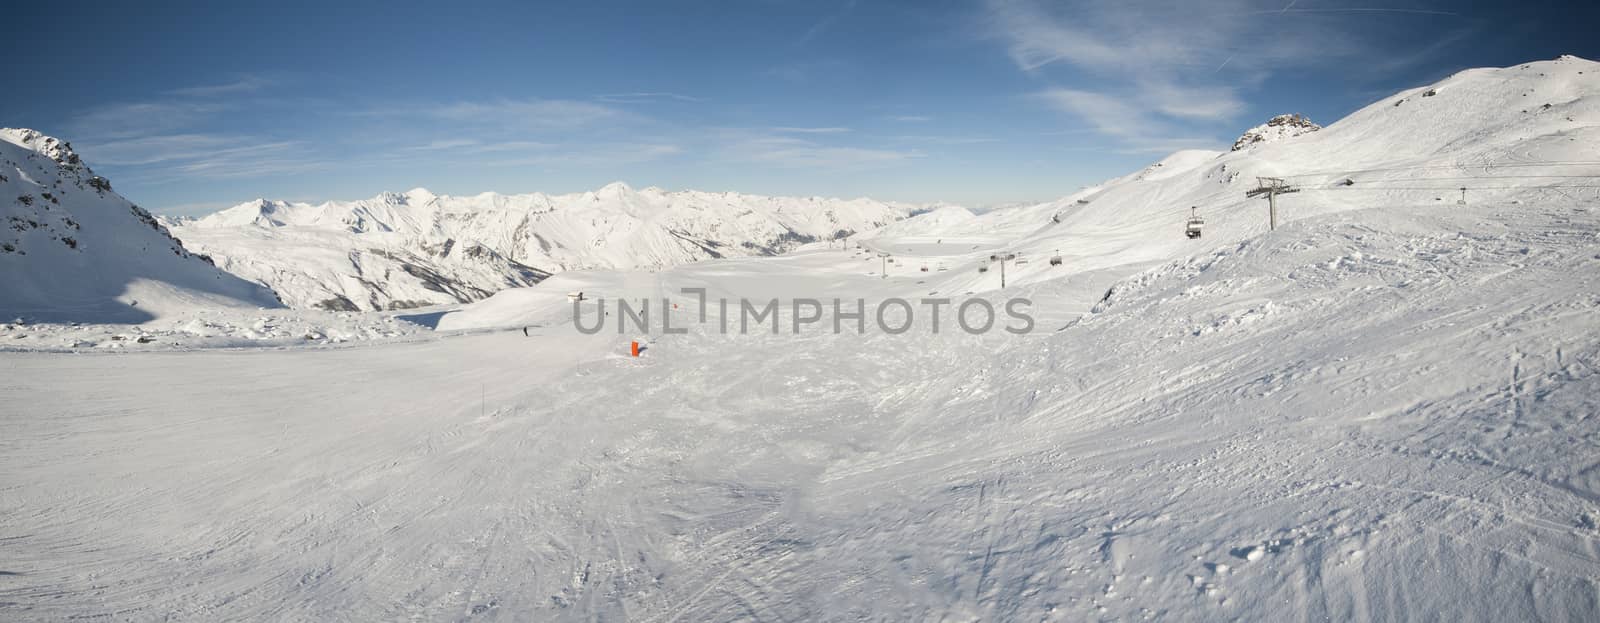 View down a piste with skiers and mountains